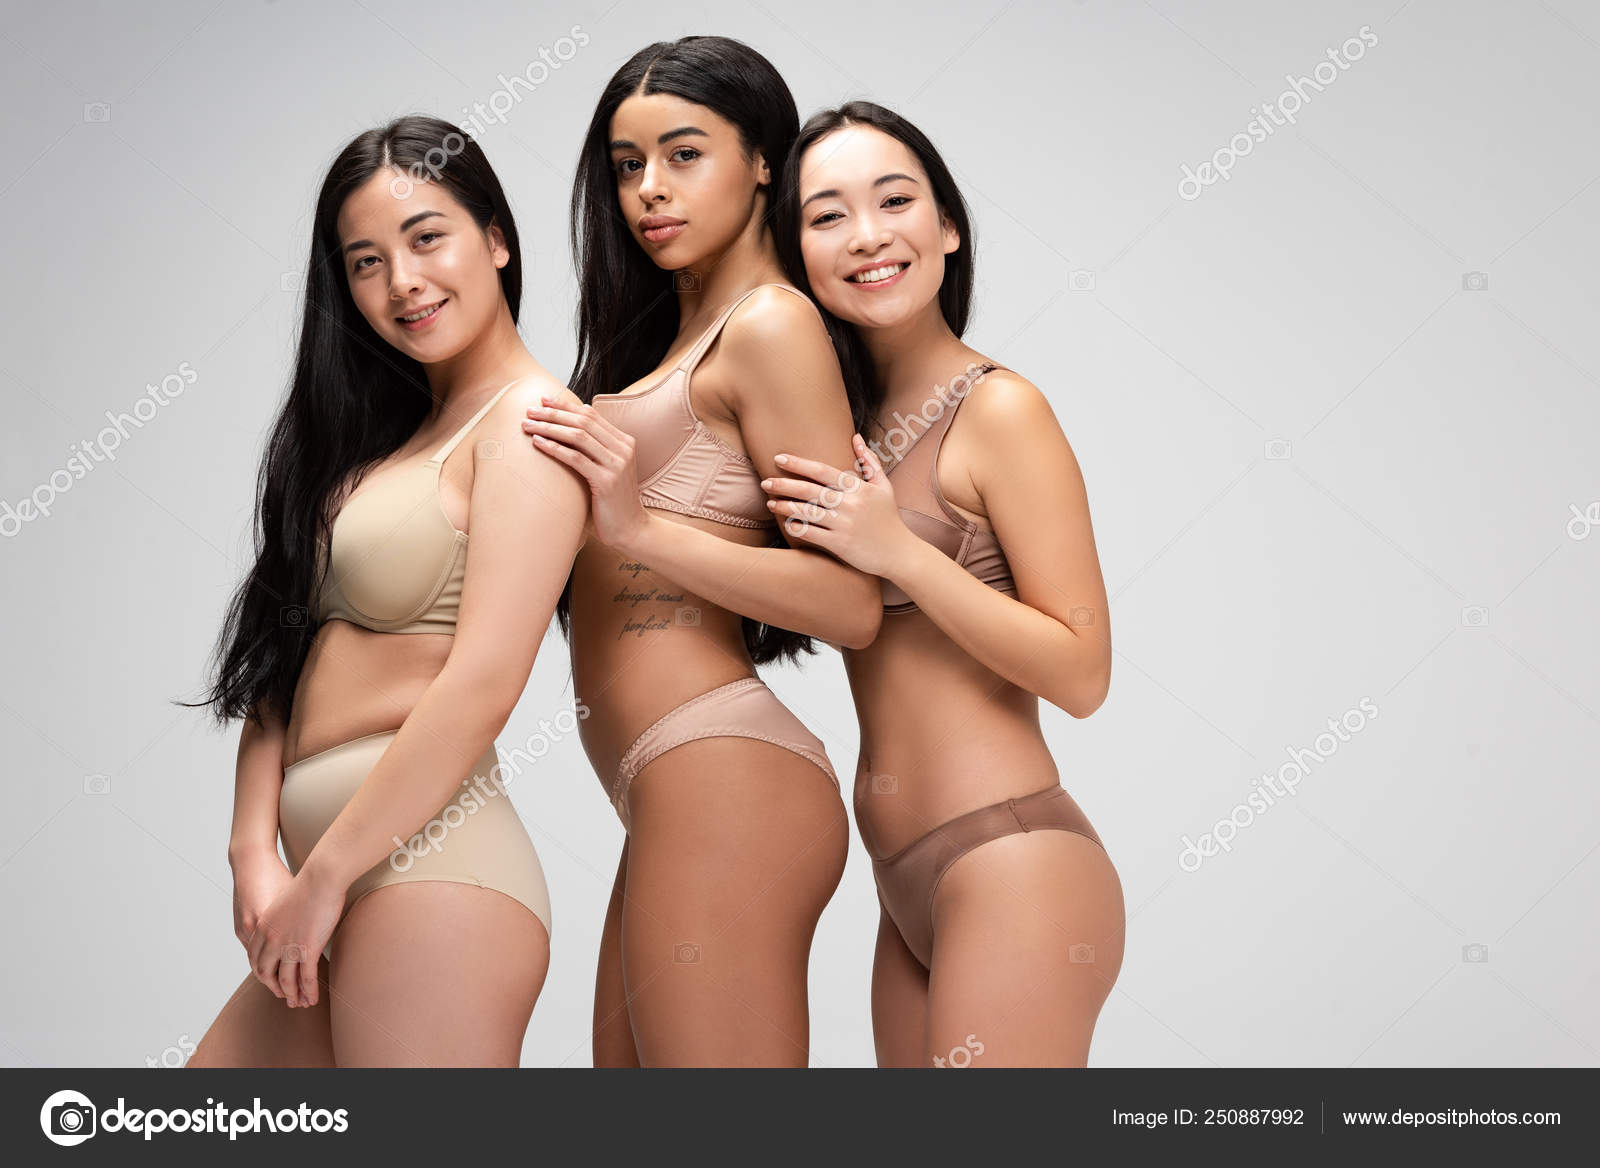 Smiling Multiethnic Girls In Underwear Holding Apples Stock Photo Image Of  Purebeauty, Mixedrace: 127753642